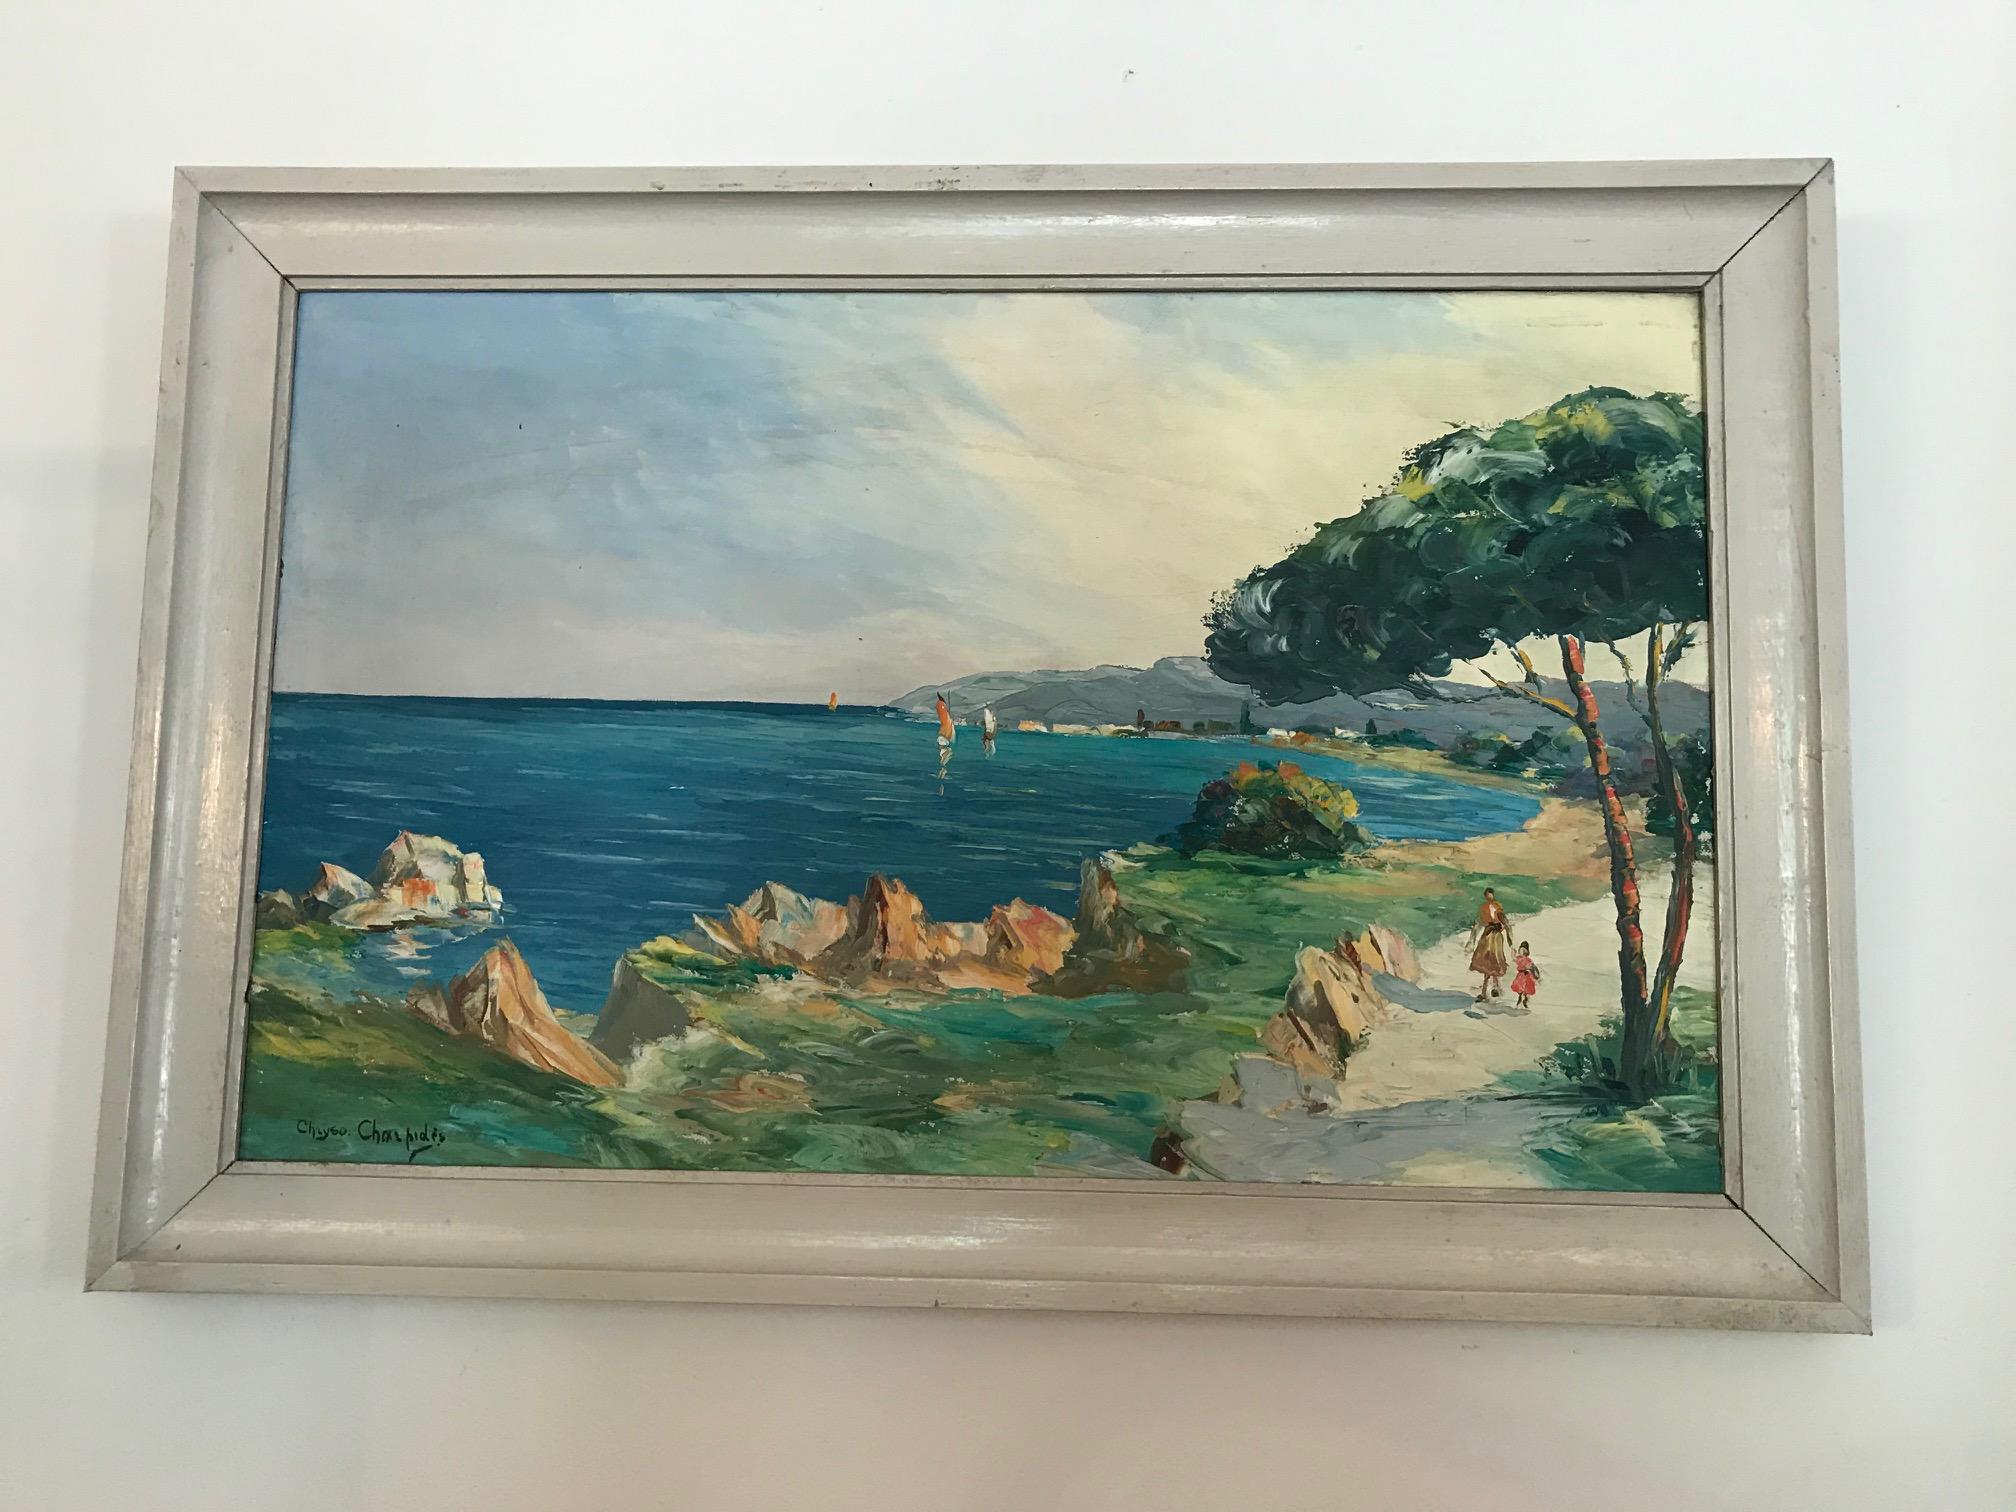 Beautiful 20th century French seaside oil on canvas from the 1920s.
Painted and signed by Christophe Charpidès (1909-1992).
Christo Chapidès was born in Samos (Greece) in 1909.
He settled in Paris in the 1930s, then married the daughter of the